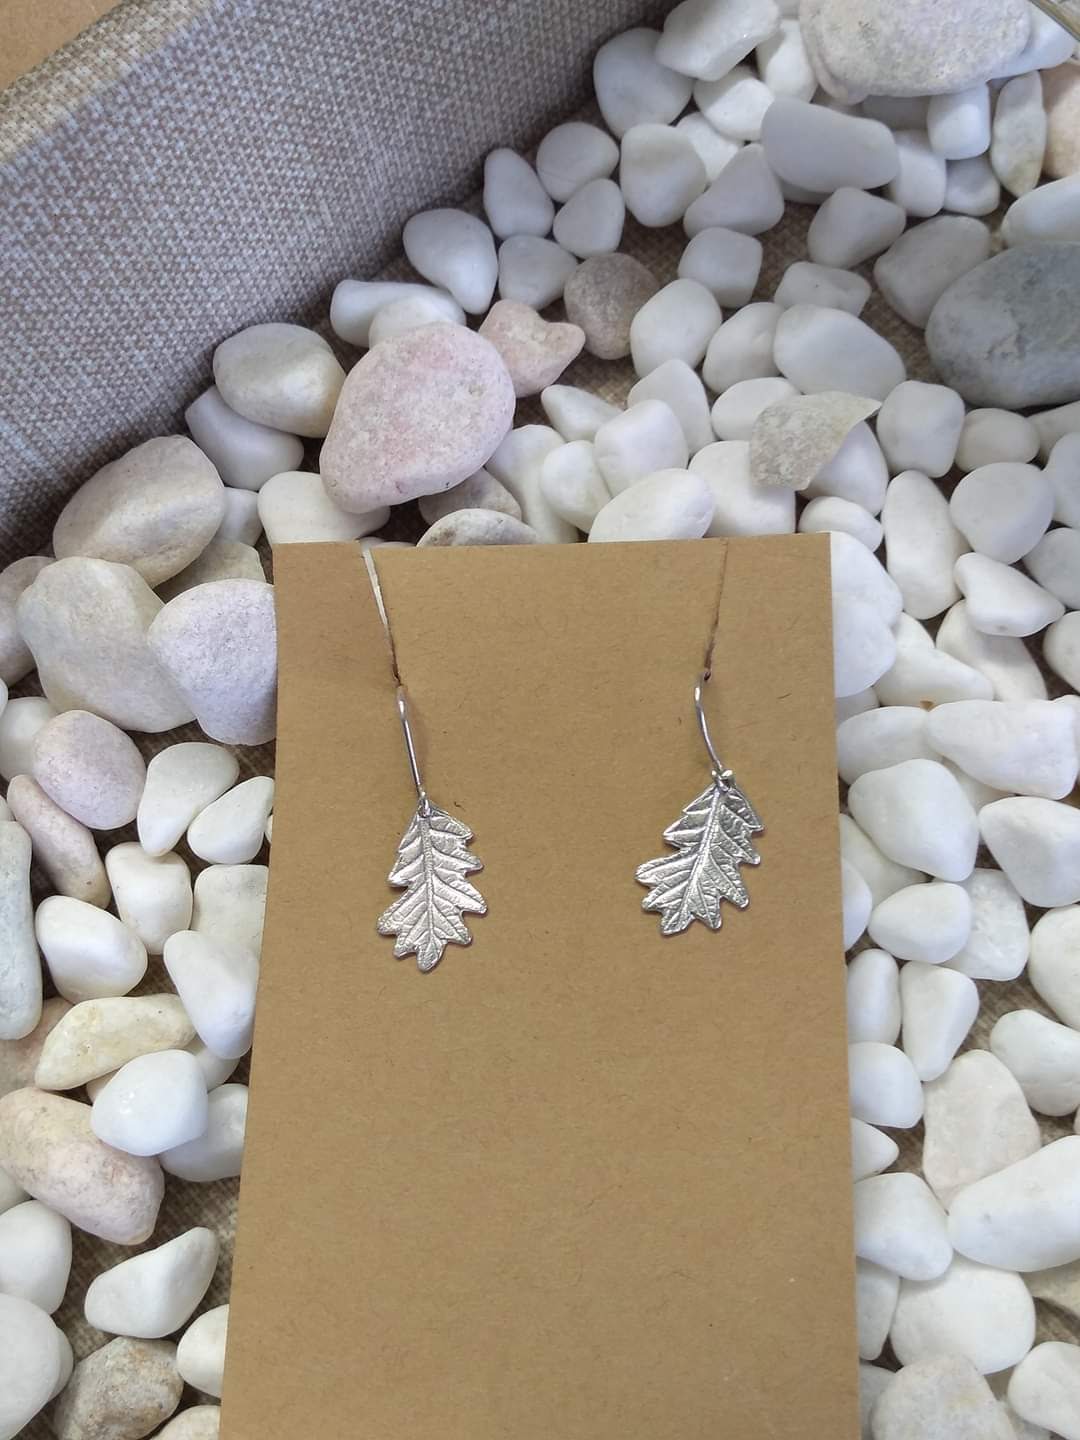 pair of approximately 1 inch long hand carved sterling silver oak leaf earrings dangling from their stems on earring hooks